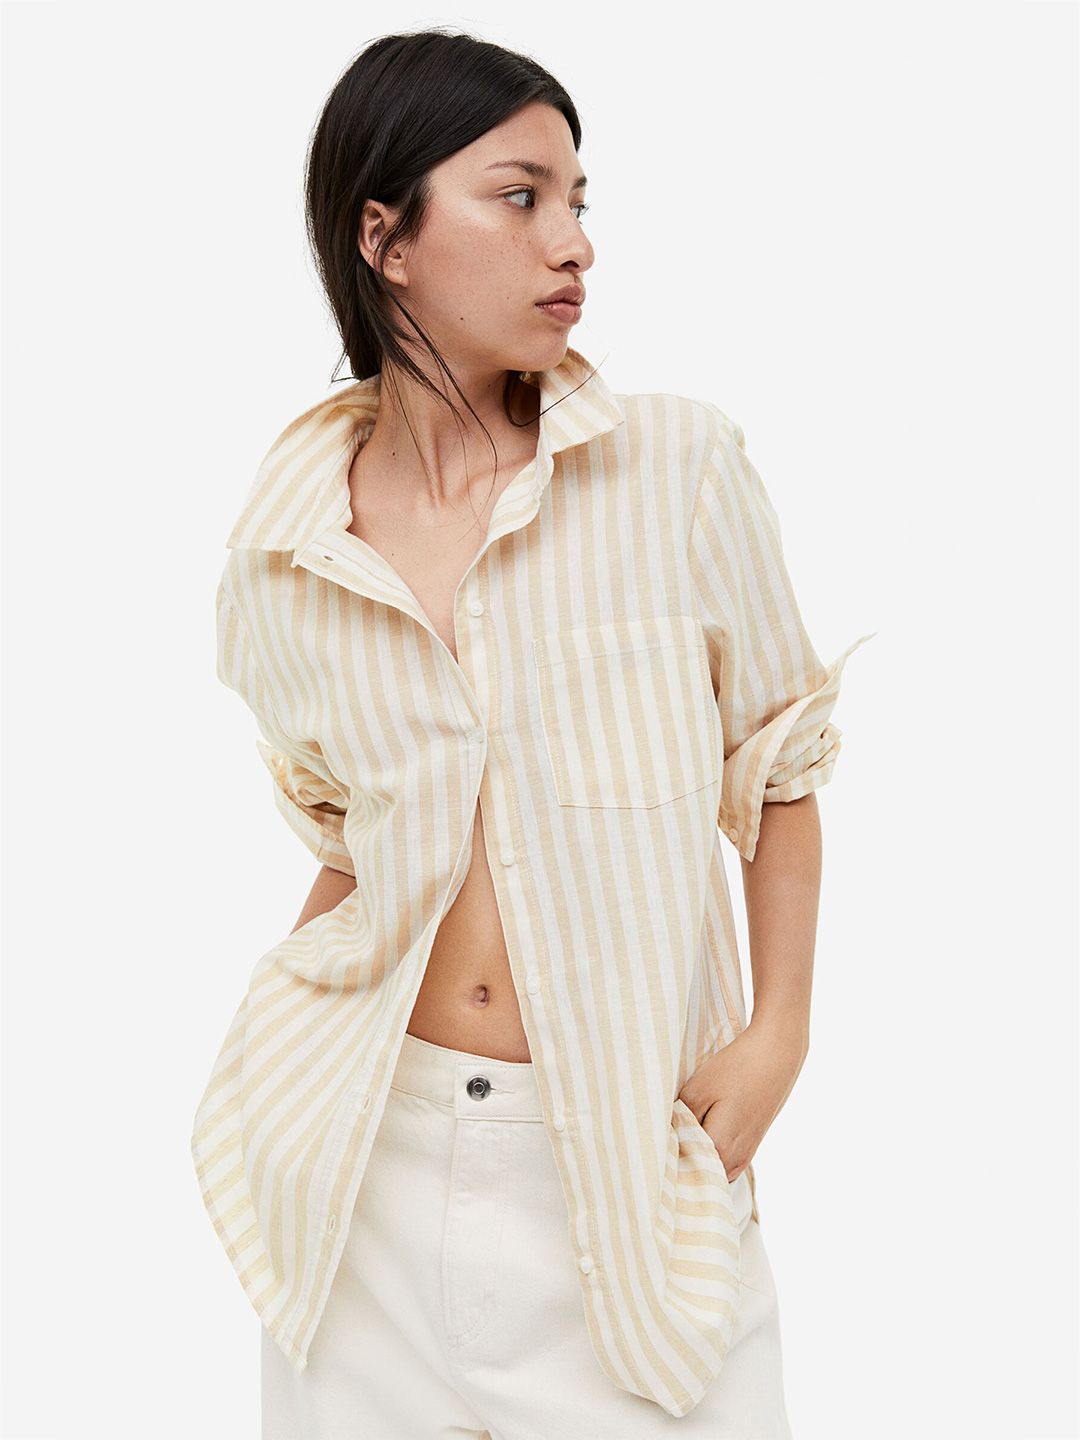 H&M Linen-Blend Shirt Price in India